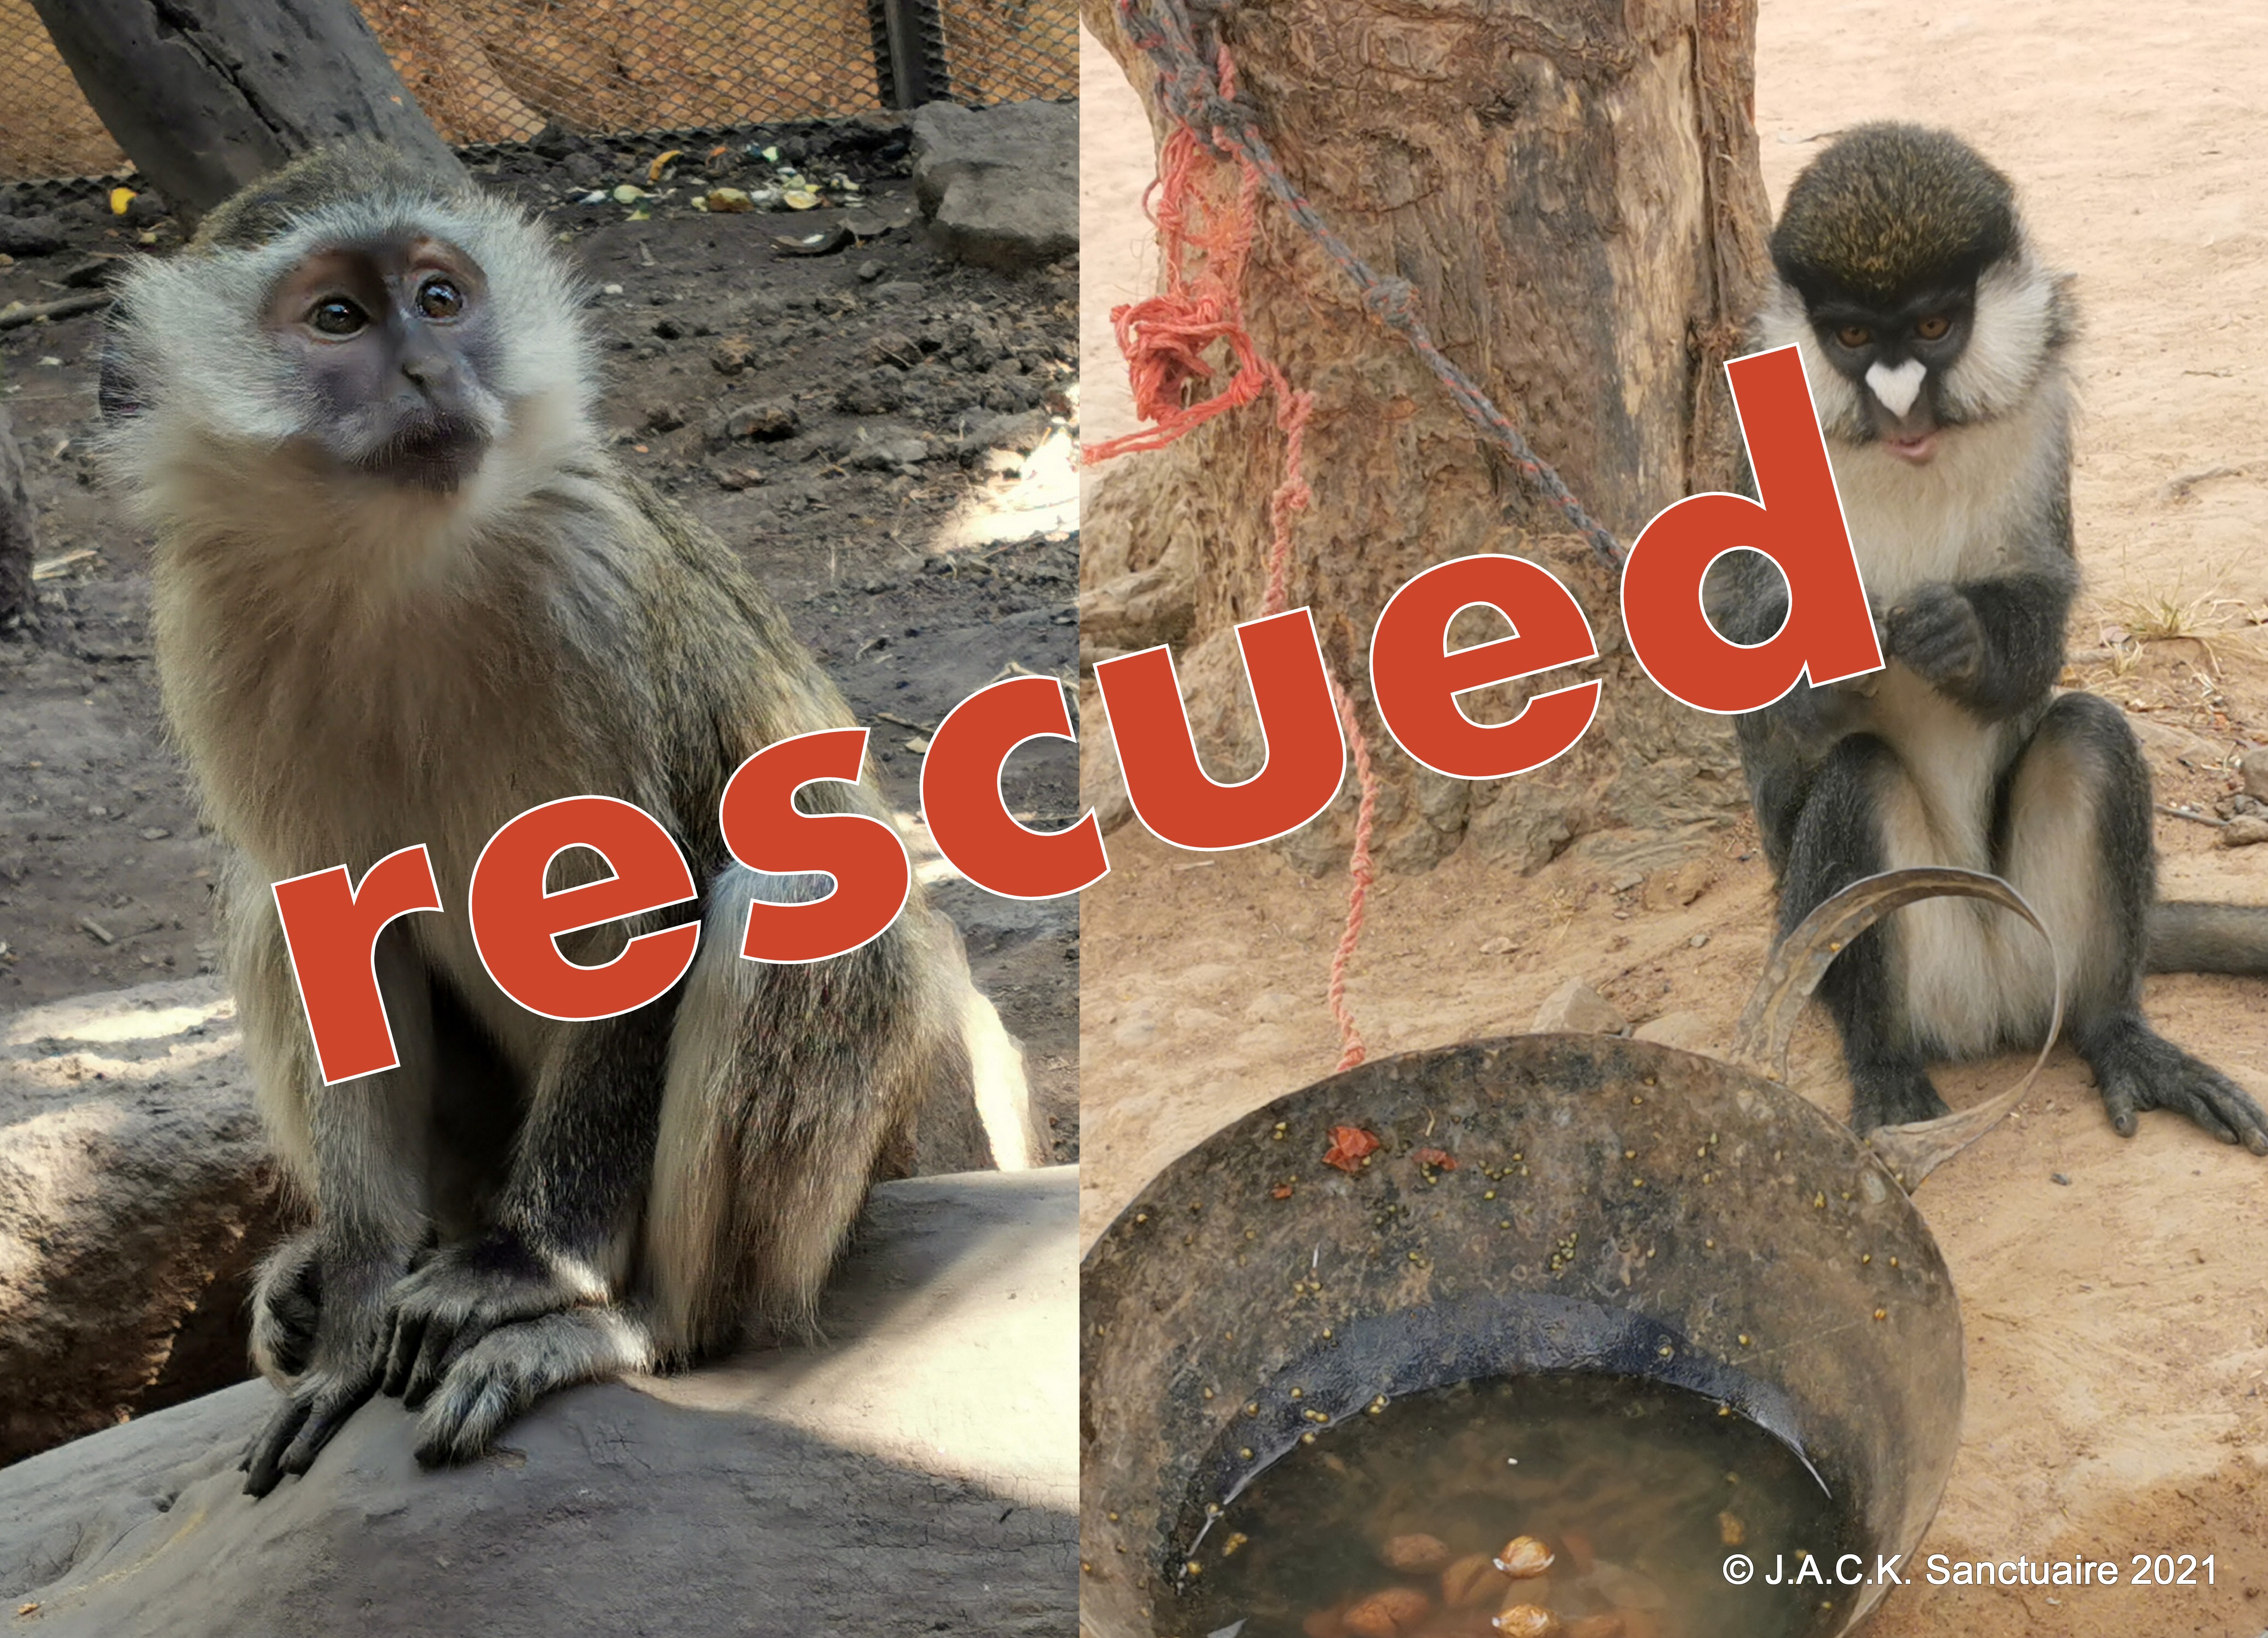 Two monkey rescues in two days!